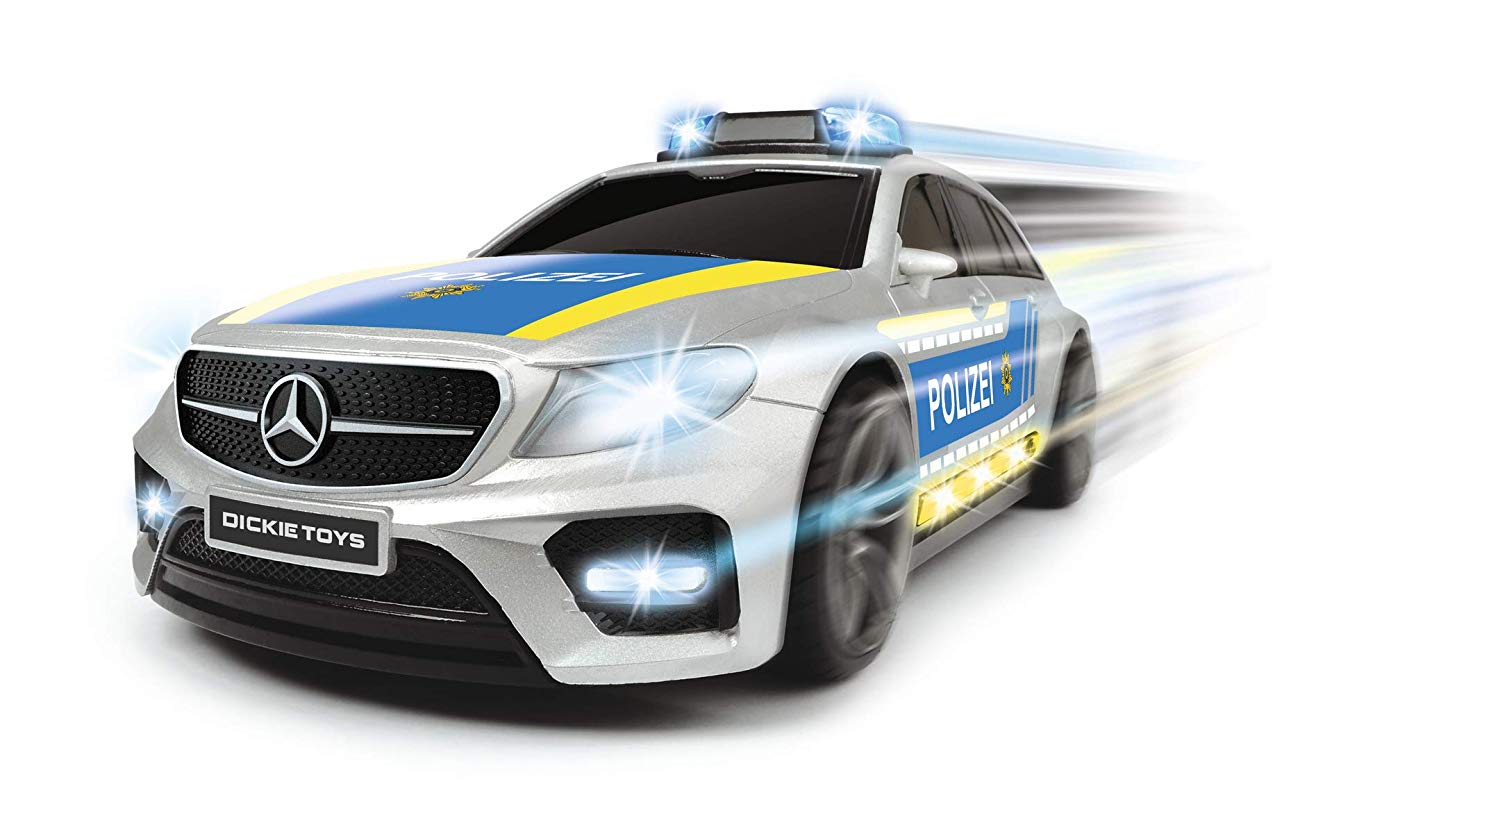 Dickie Toys 203716018 Mercedes-Amg E43 Toy Car Police Car Vehicle With Ligh